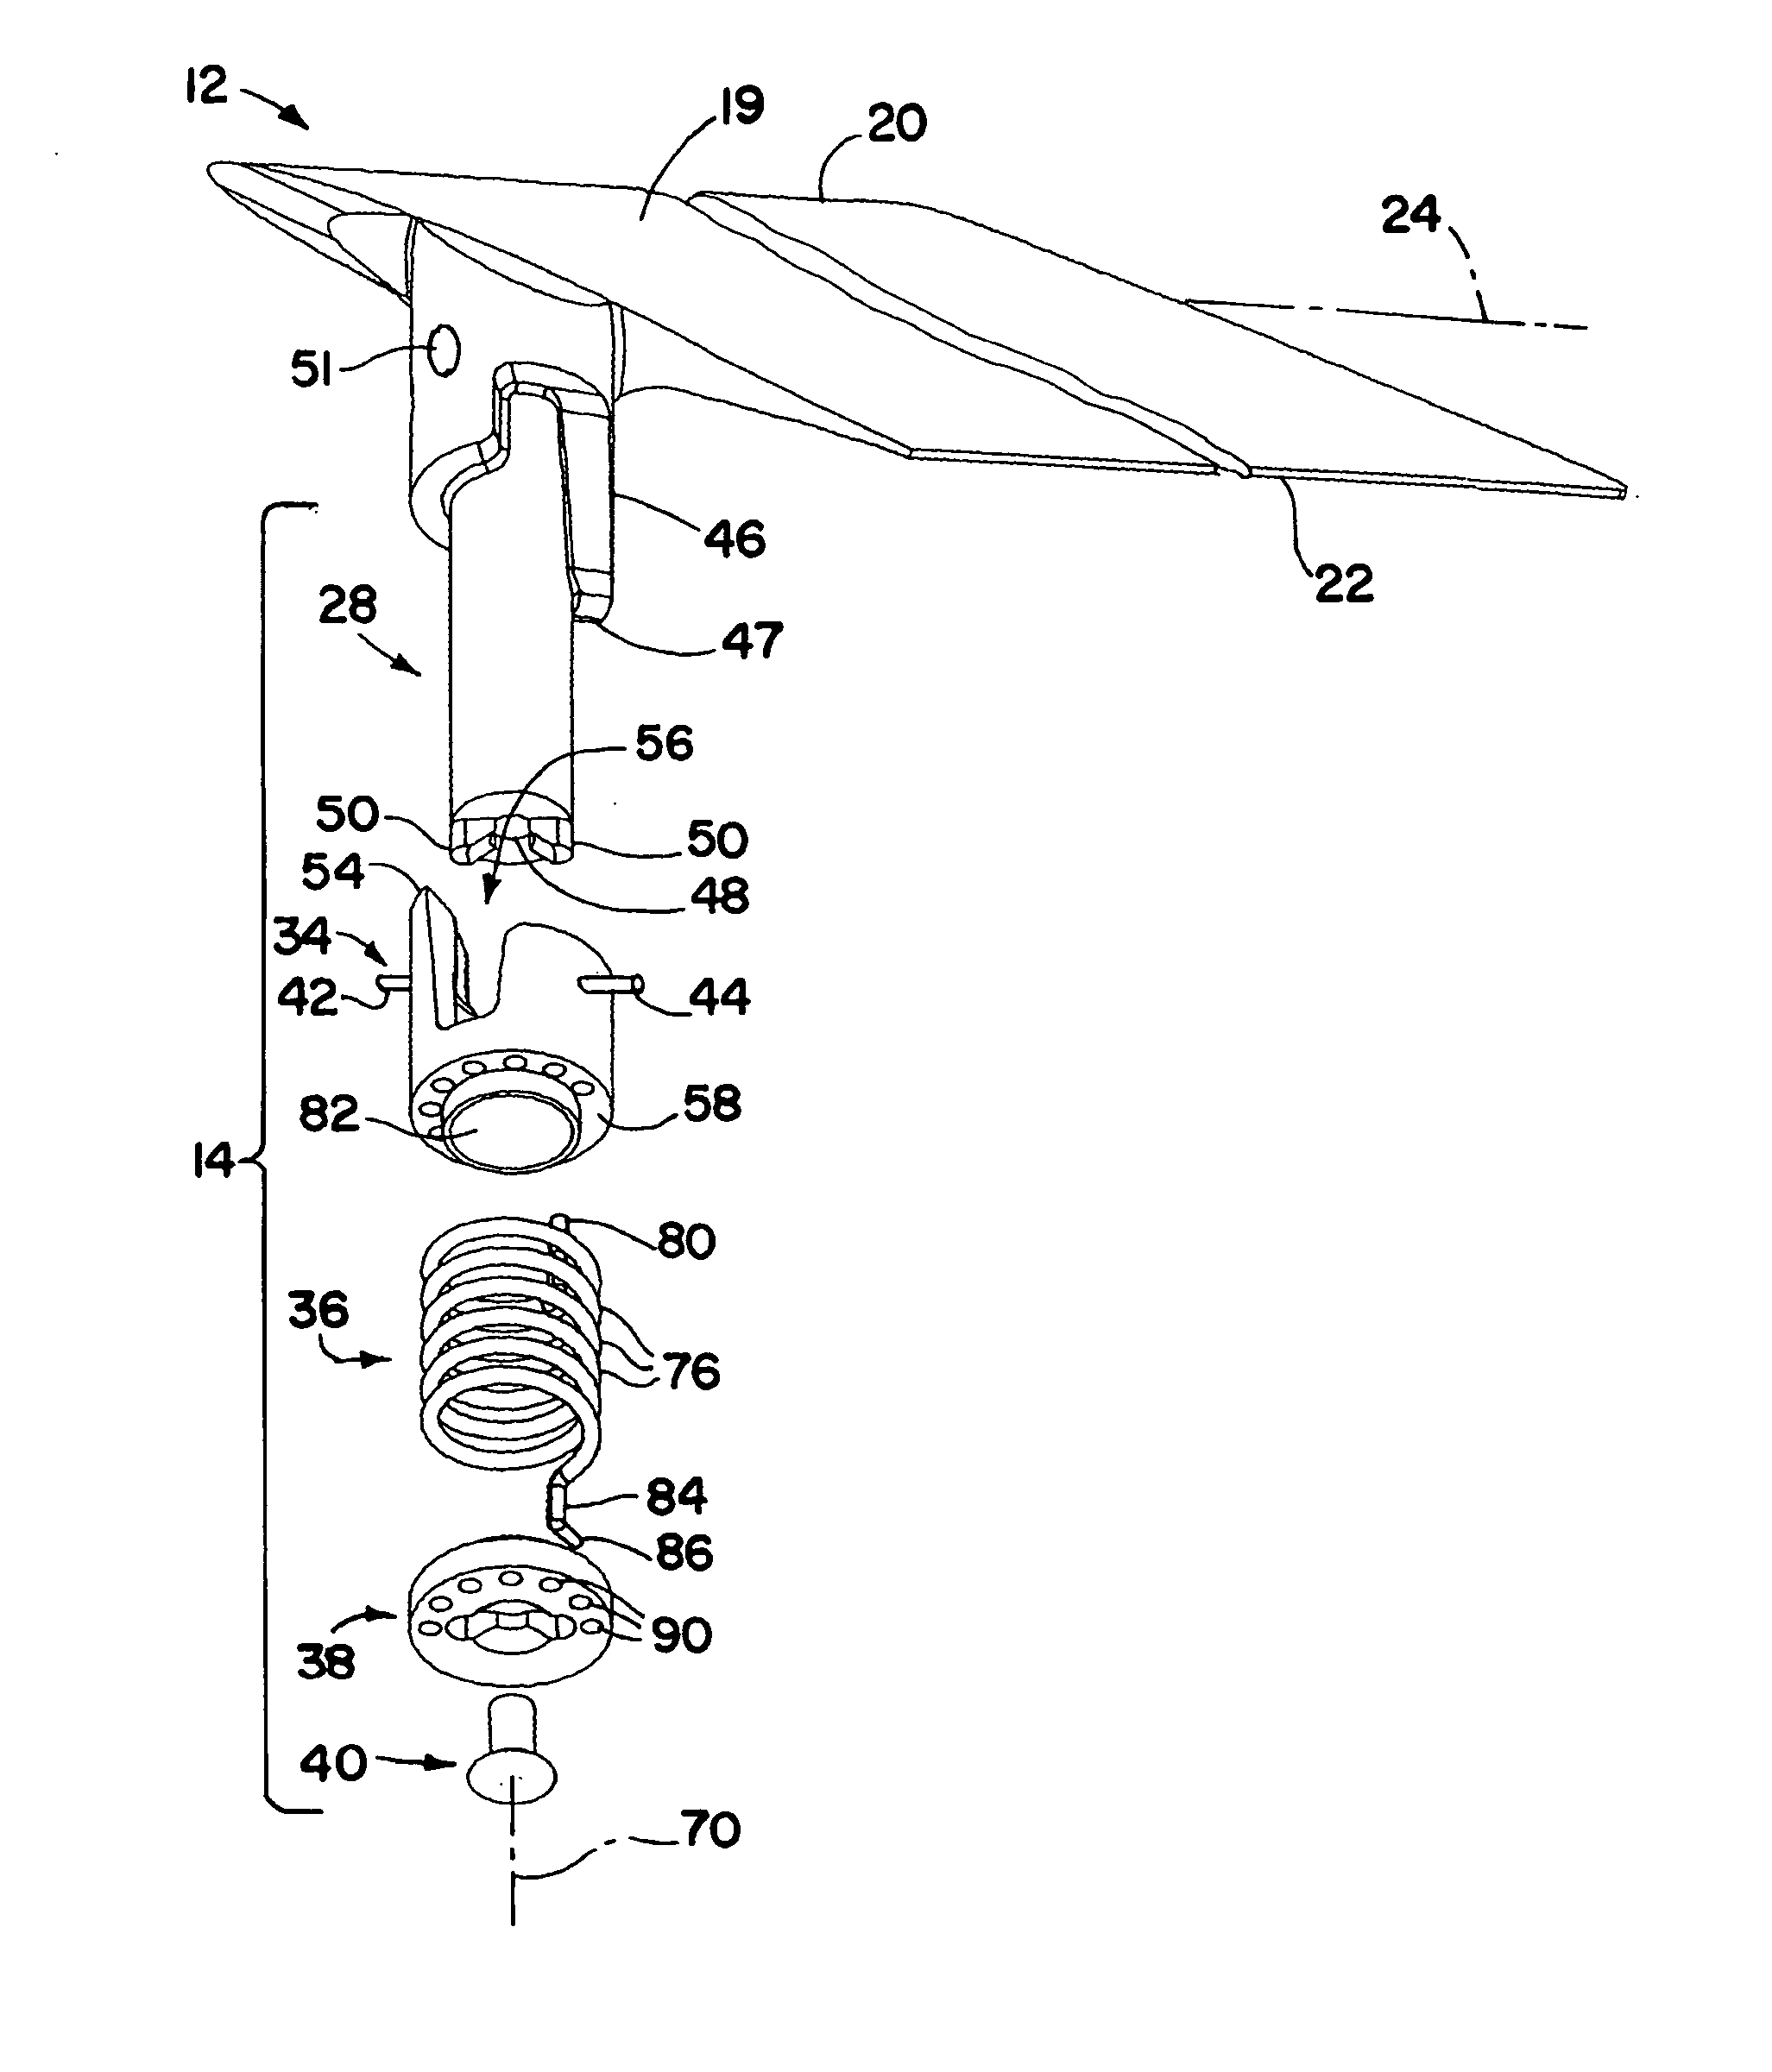 Single-axis fin deployment system